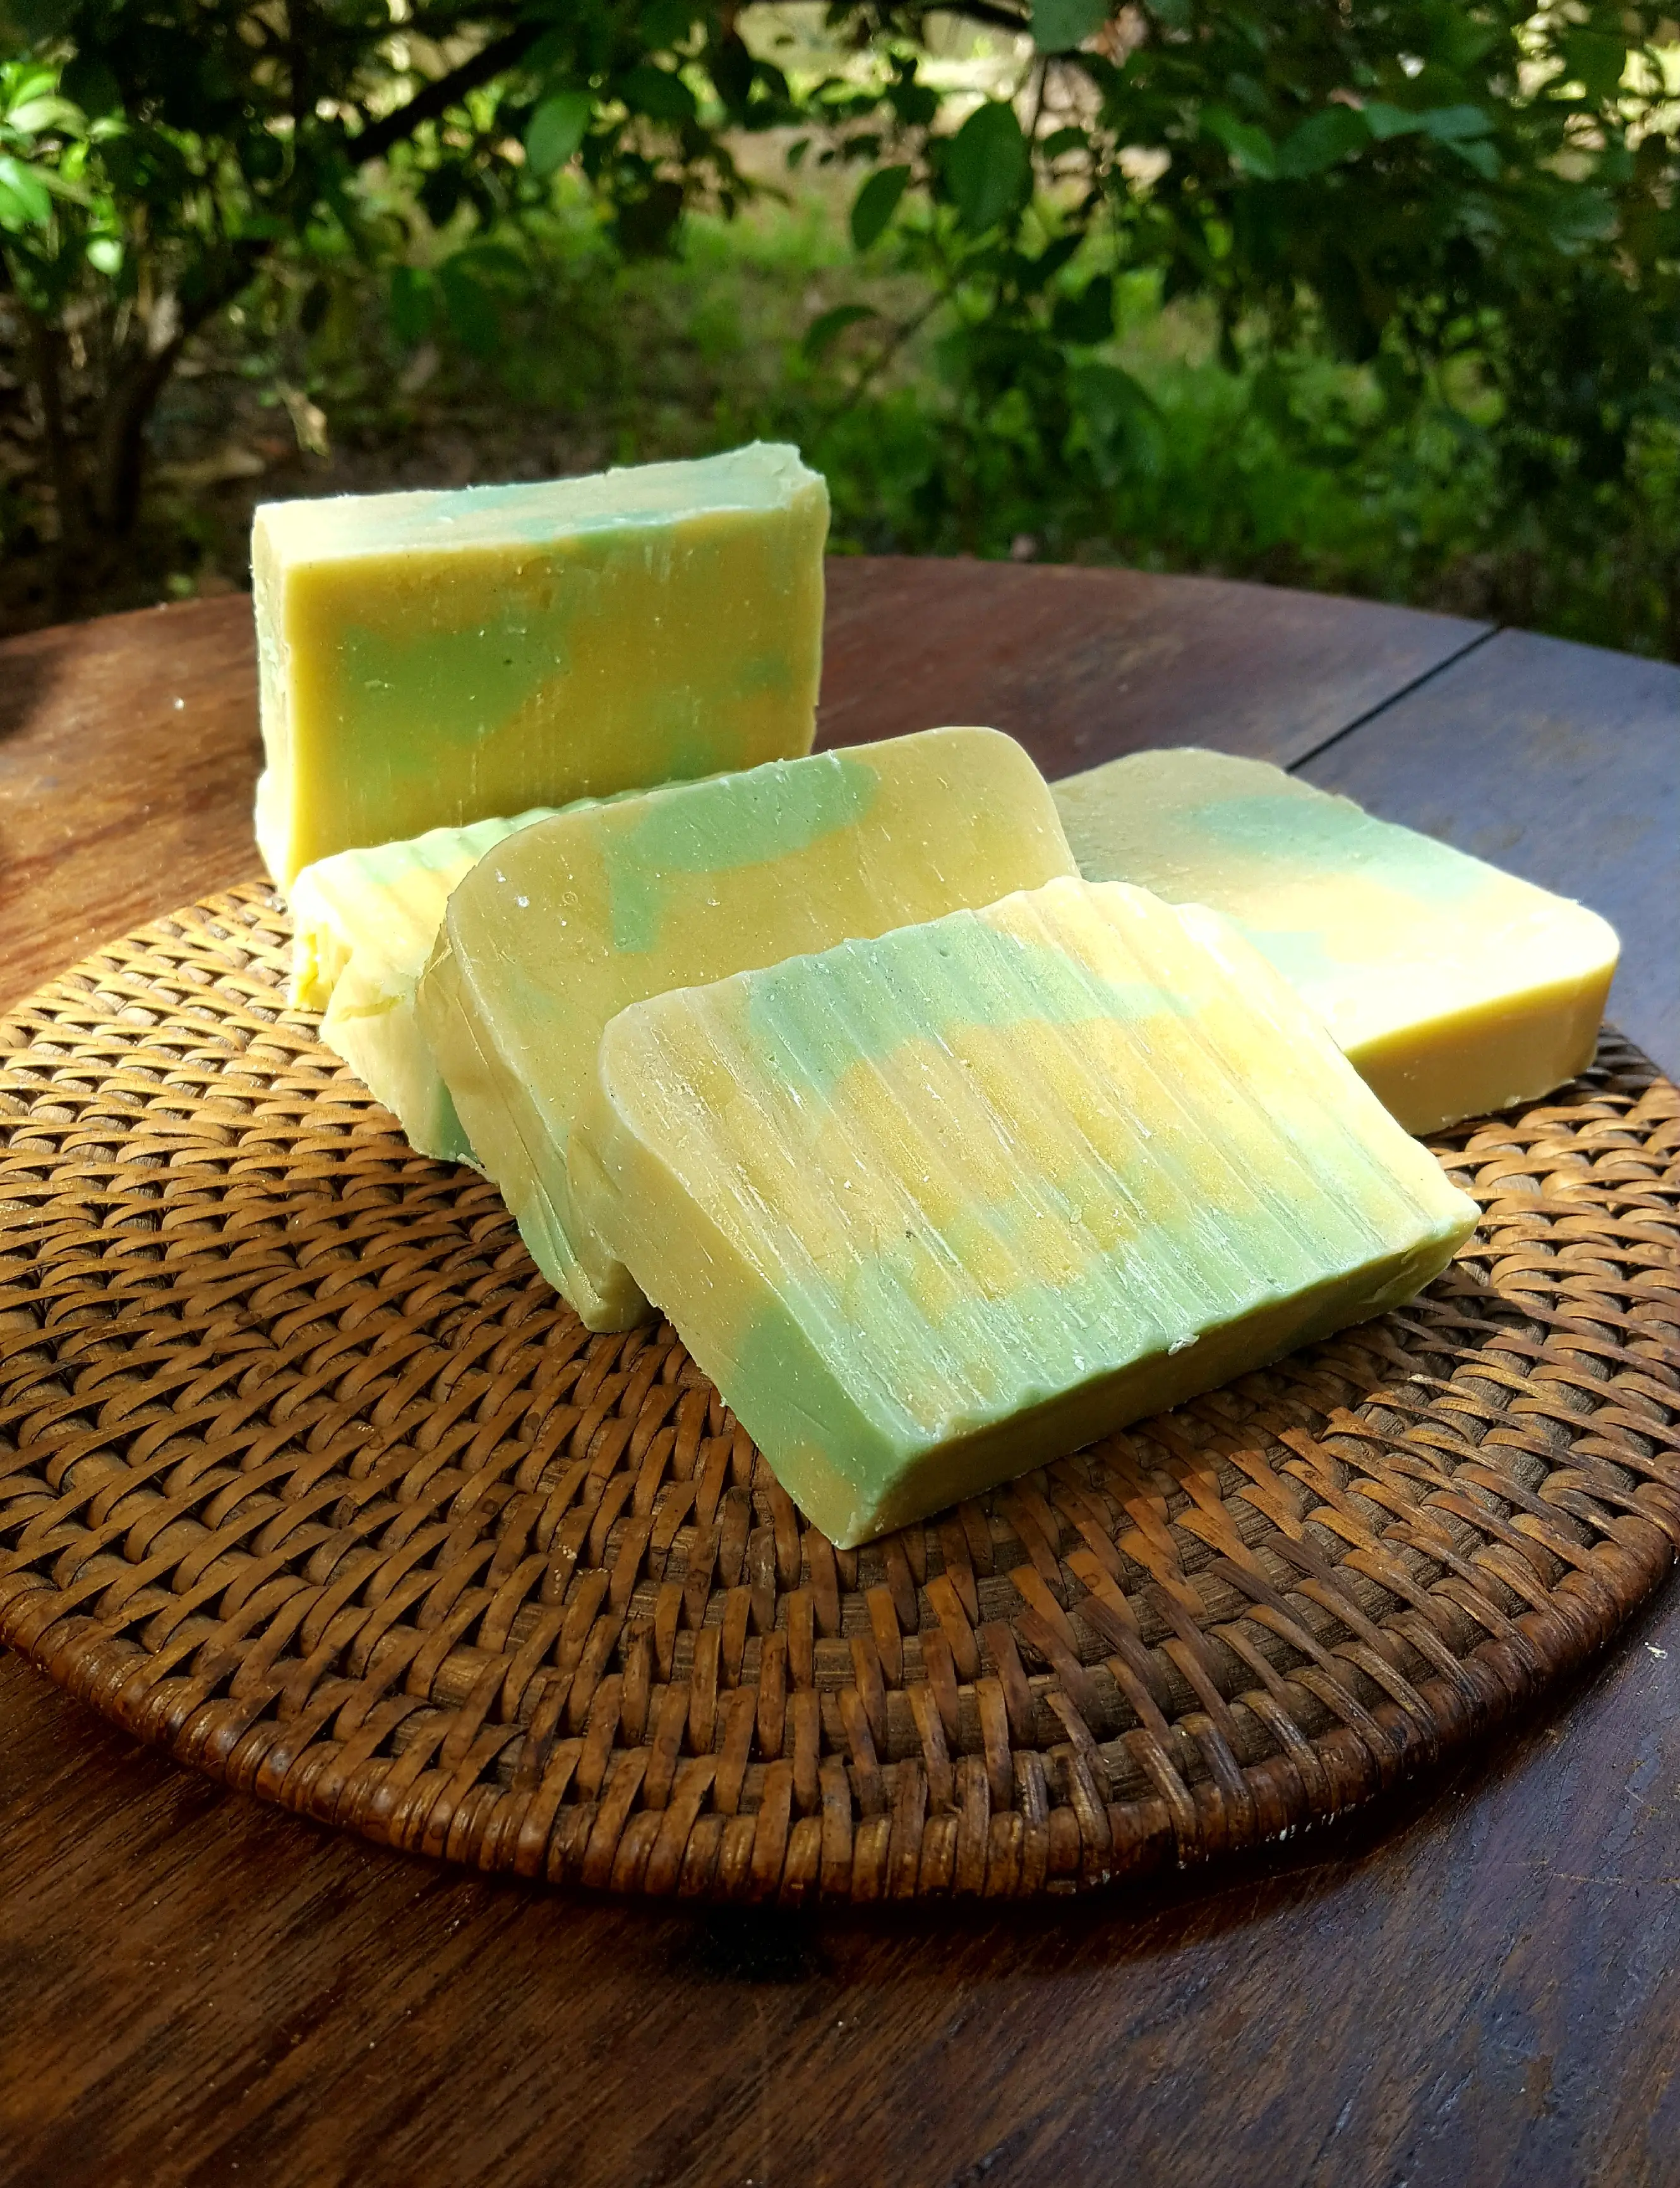 How to make homemade soap: Steps to customize scents and colors